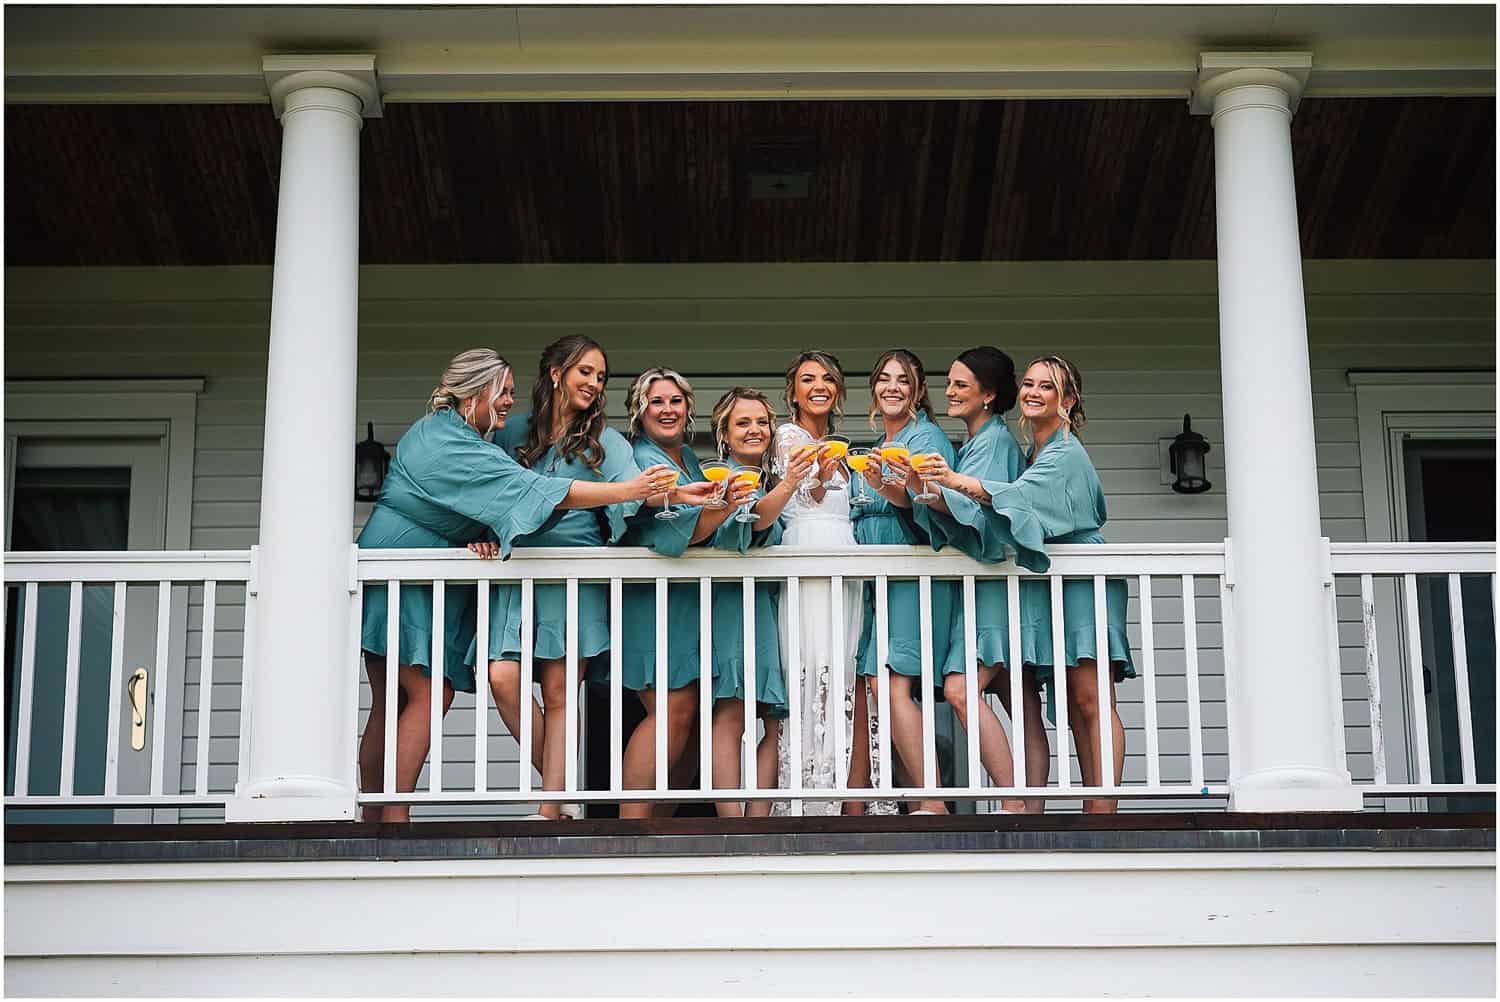 A bride and her bridesmaids in matching robes have a toast on a porch with white columns.